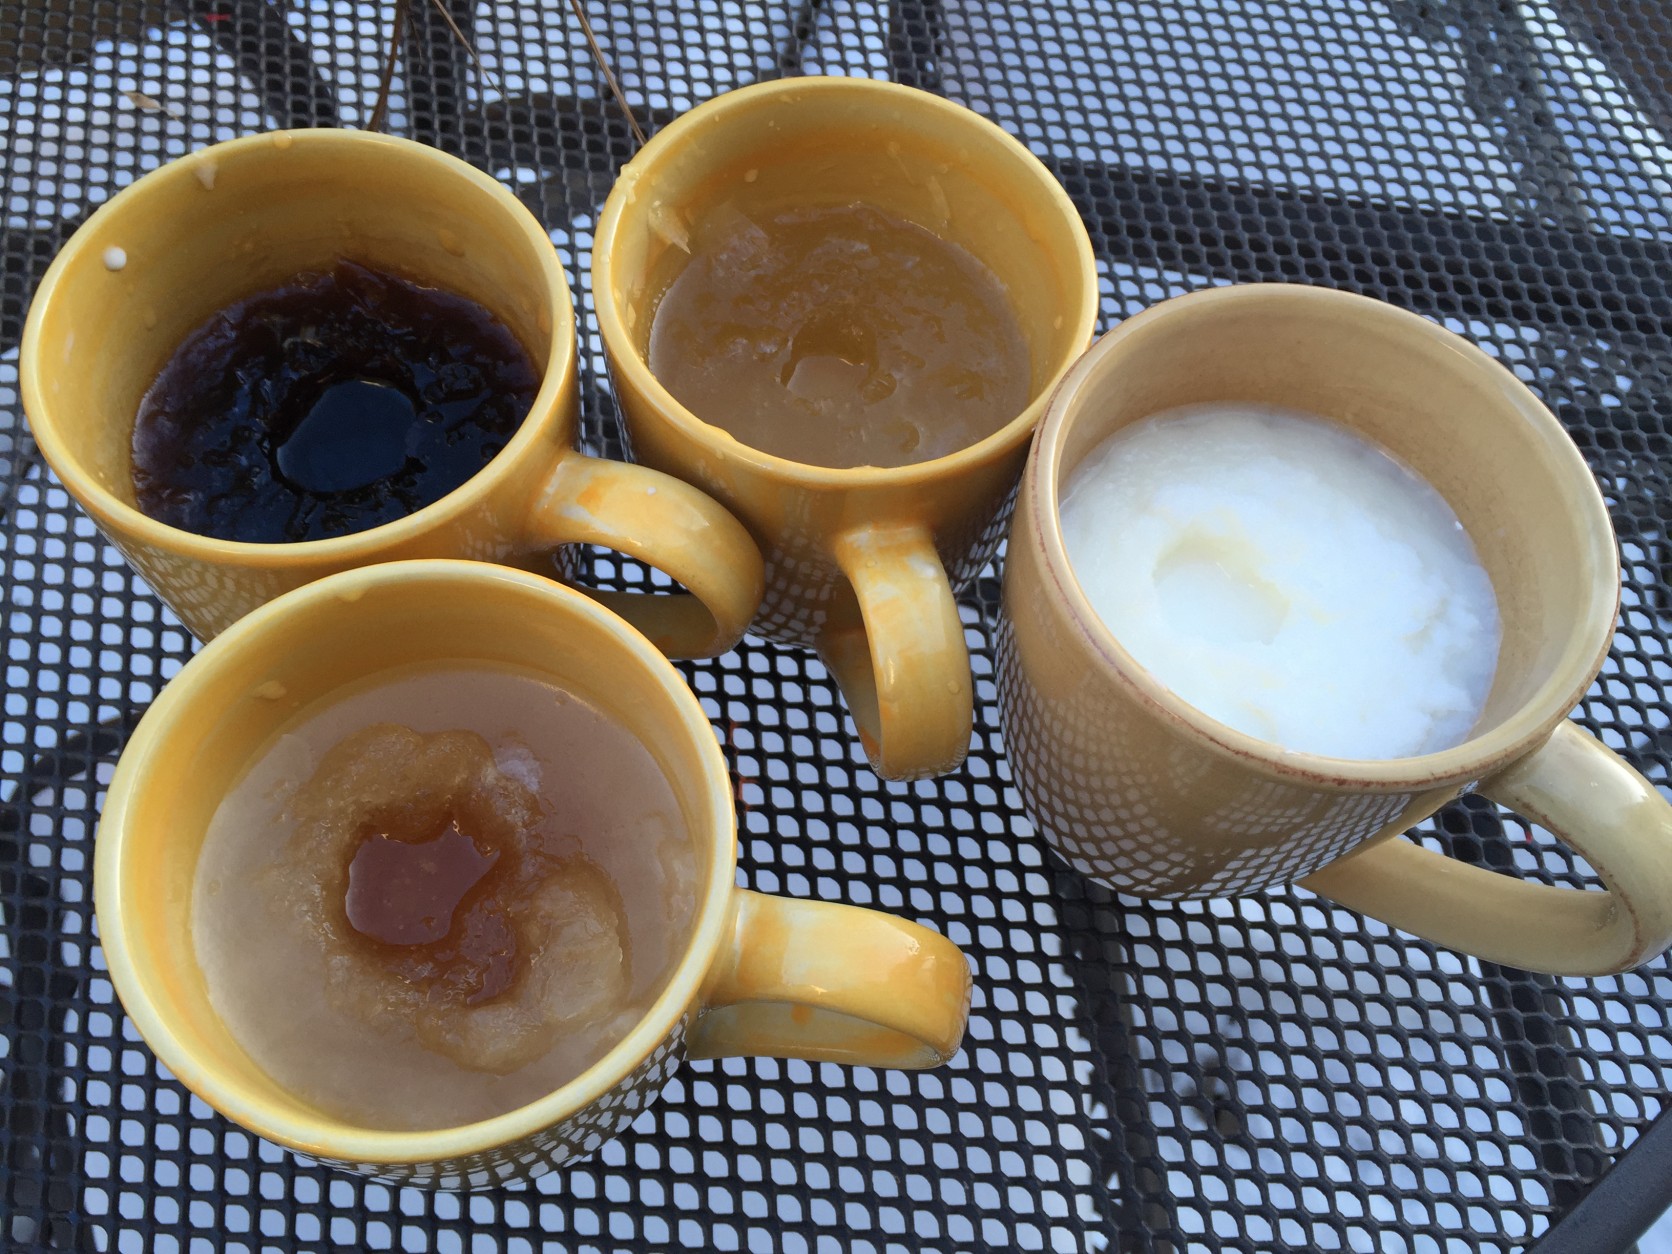 Two hours and 30 minutes after being left in 10 degree temperatures, all four drinks have some ice, but none is frozen solid. (WTOP/Neal Augenstein)